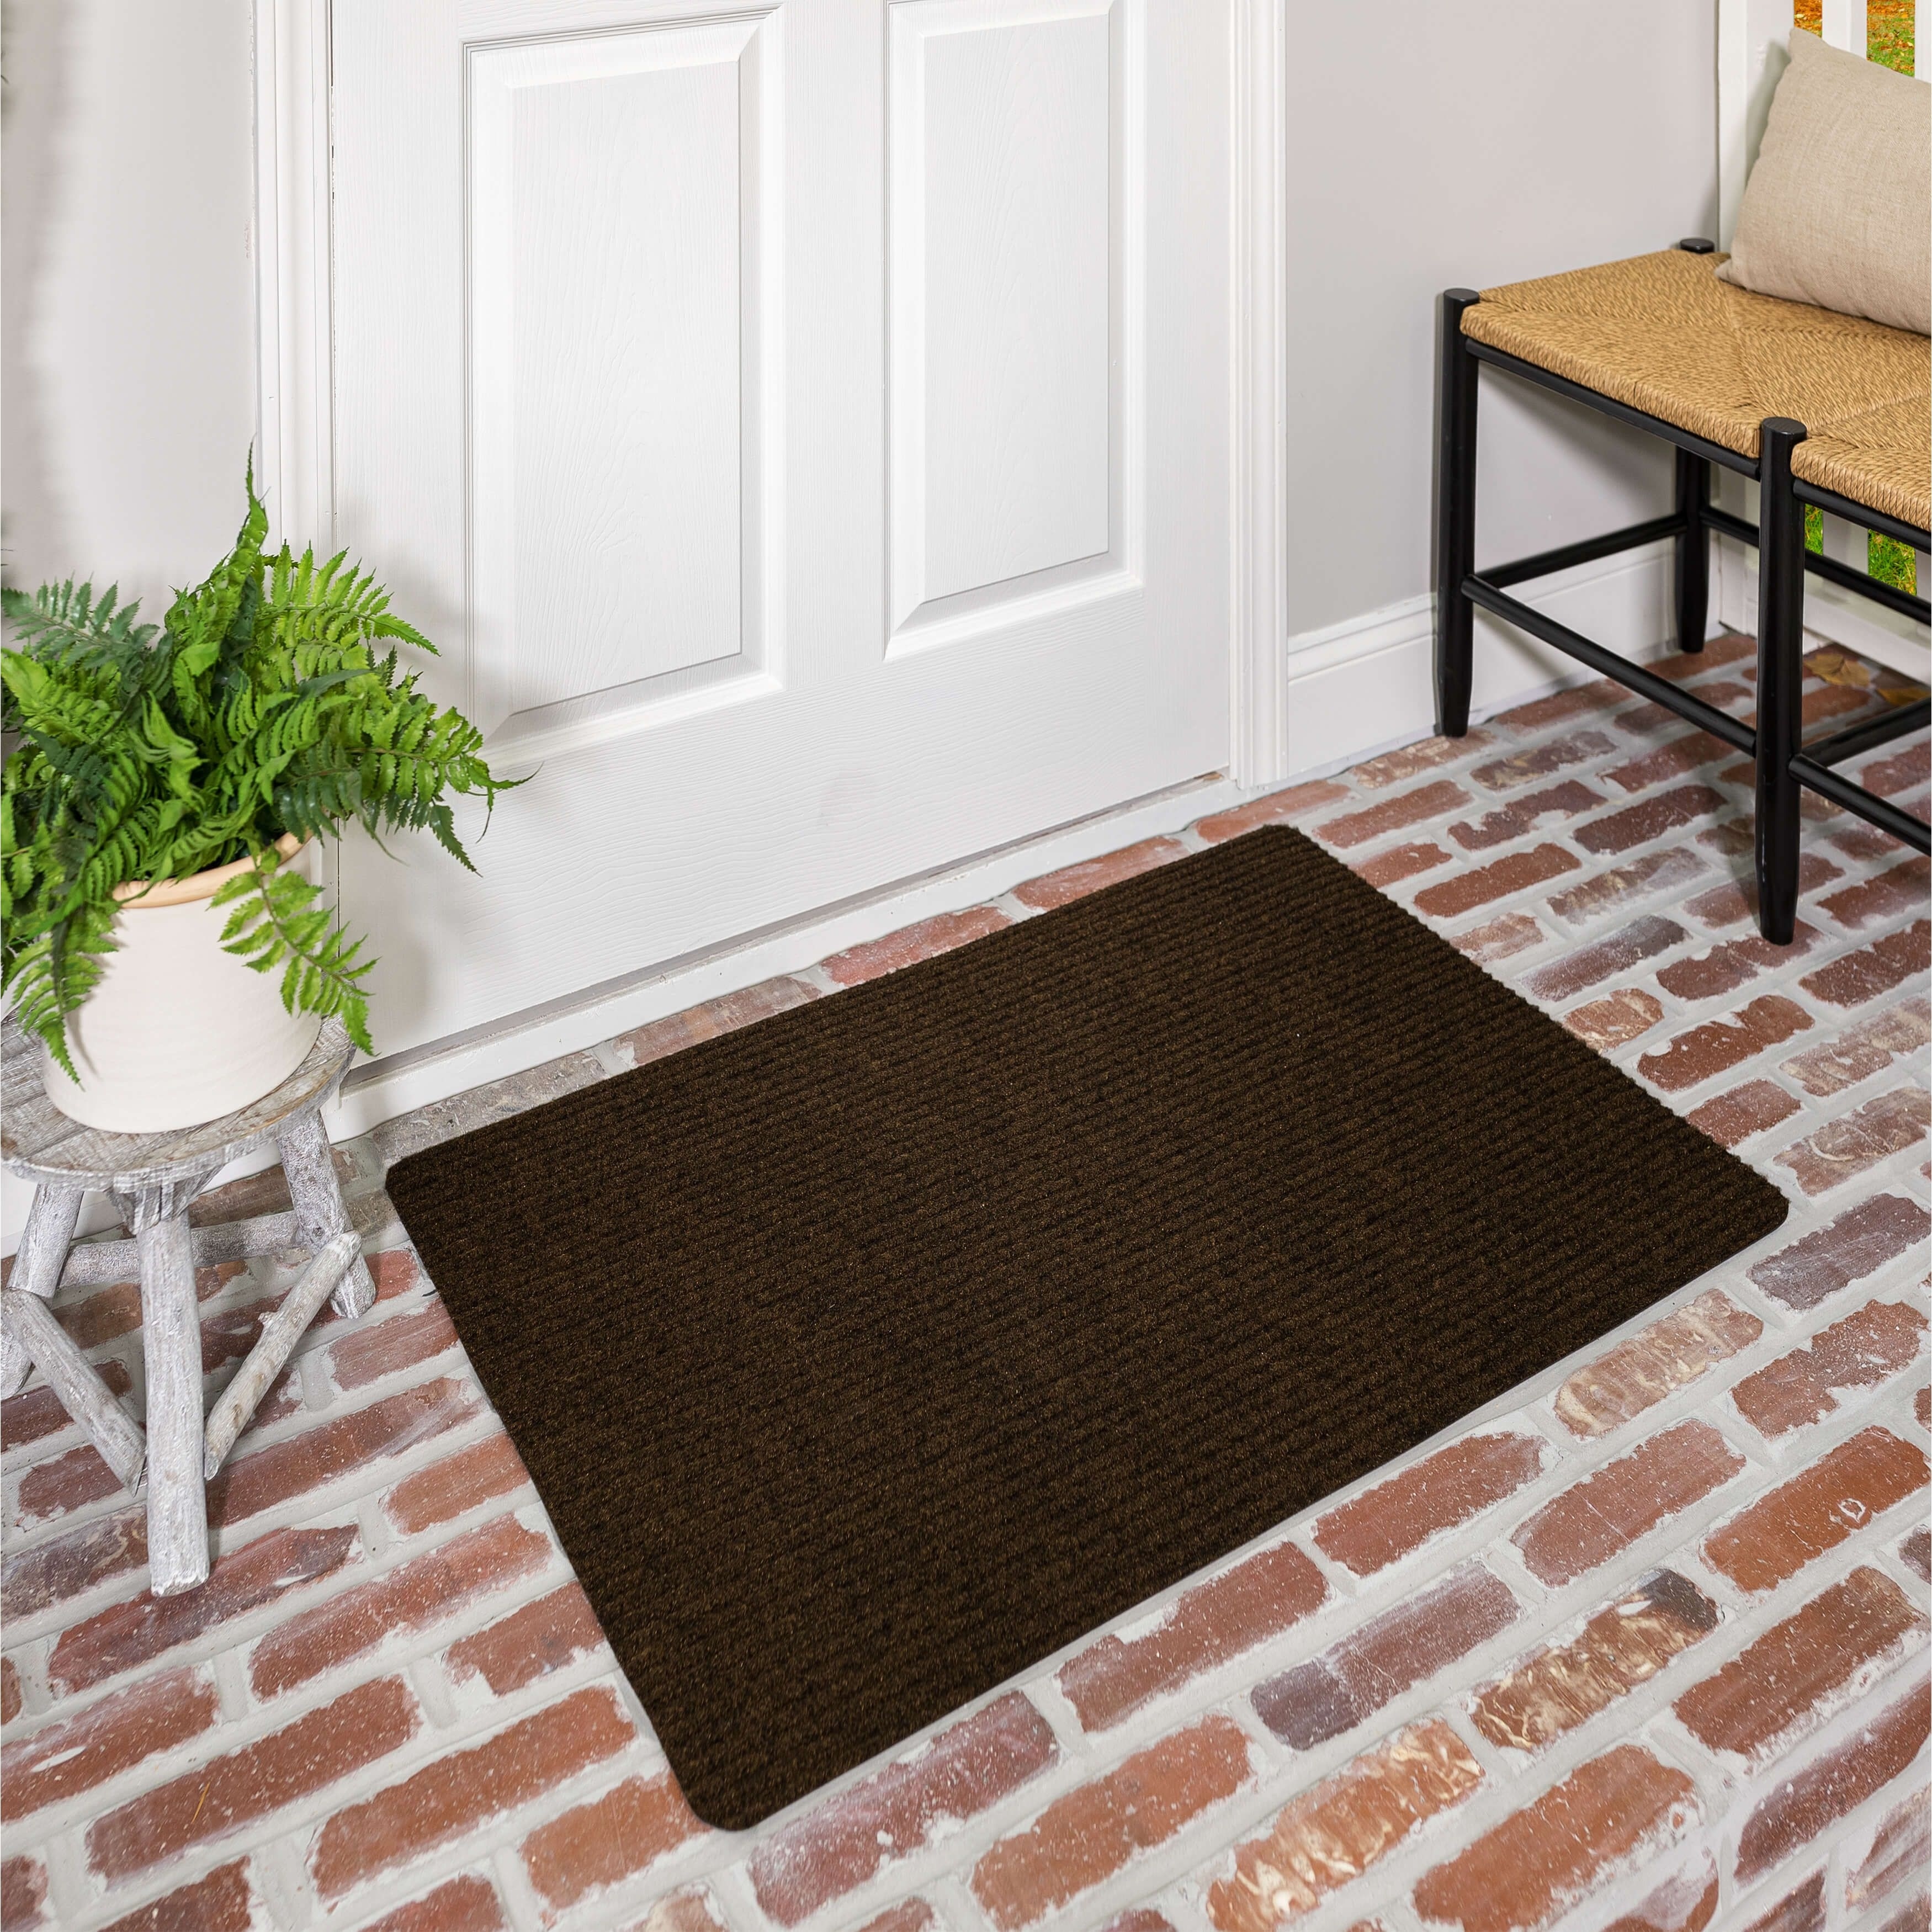 https://ak1.ostkcdn.com/images/products/is/images/direct/62d6cb364f009abb19c8b461f7045dea9b2624b5/Mohawk-Home-Utility-Floor-Mat-for-Garage%2C-Entryway%2C-Porch%2C-and-Laundry-Room.jpg